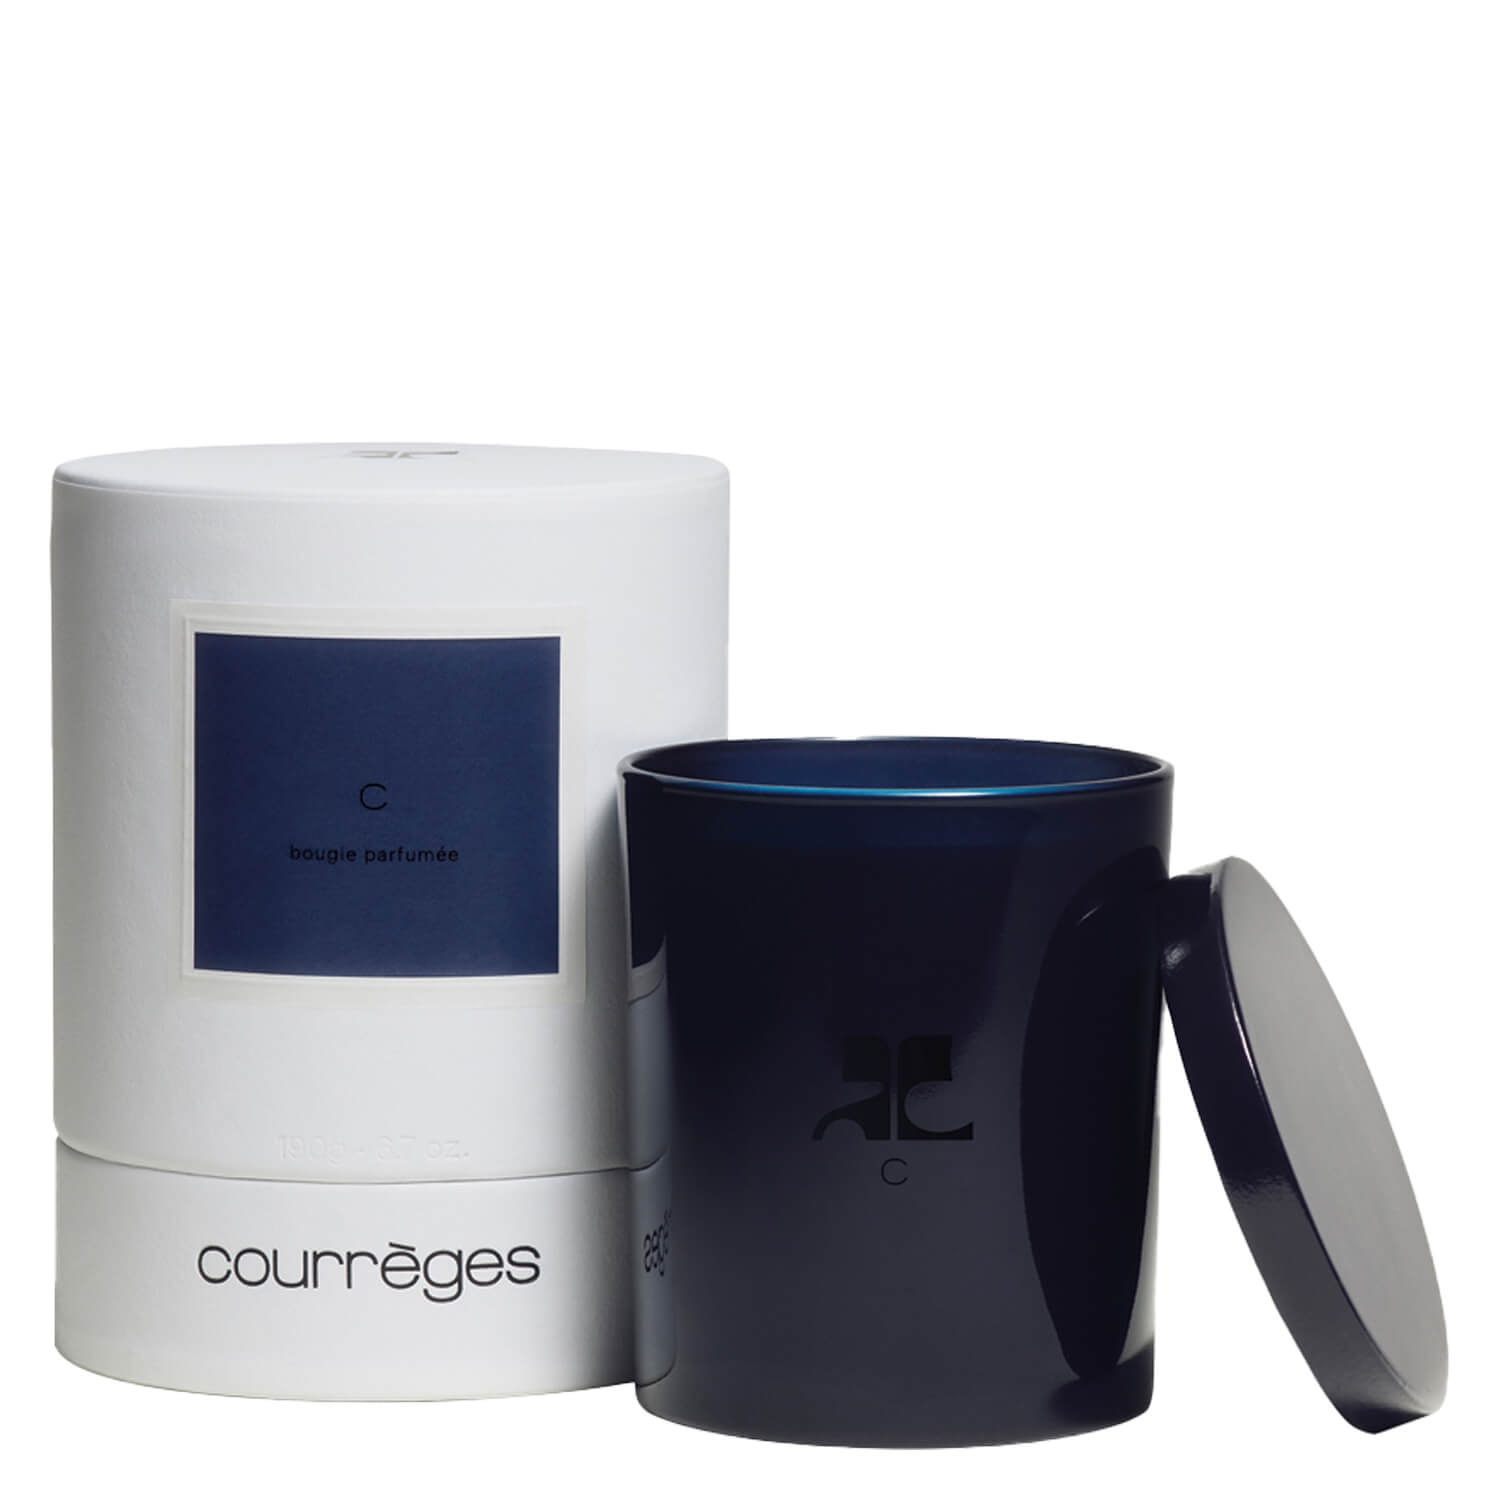 Product image from courrèges - C candle